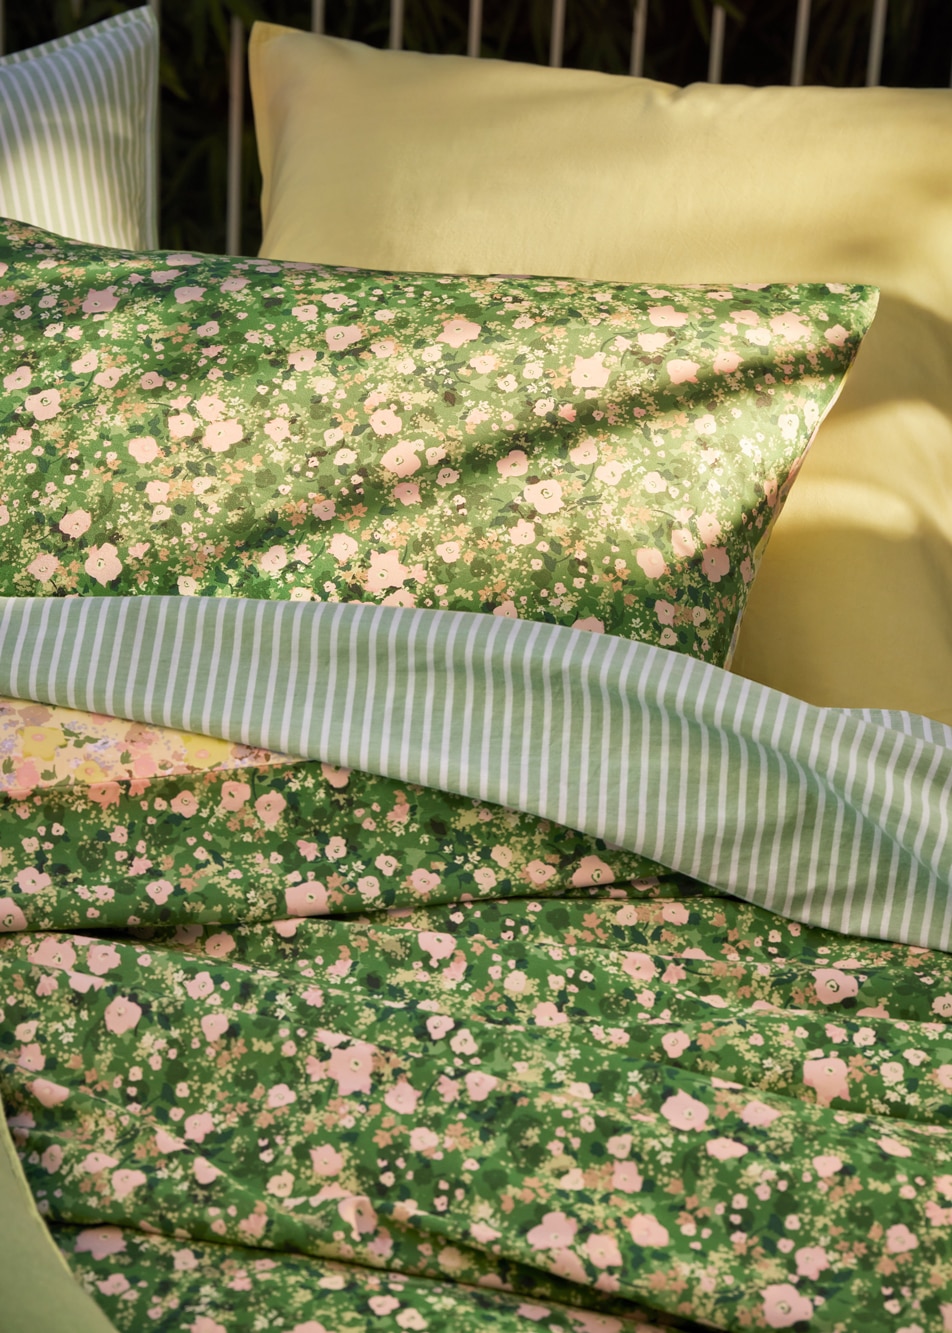 A close up image of a layered green bed with stripe and floral sheets